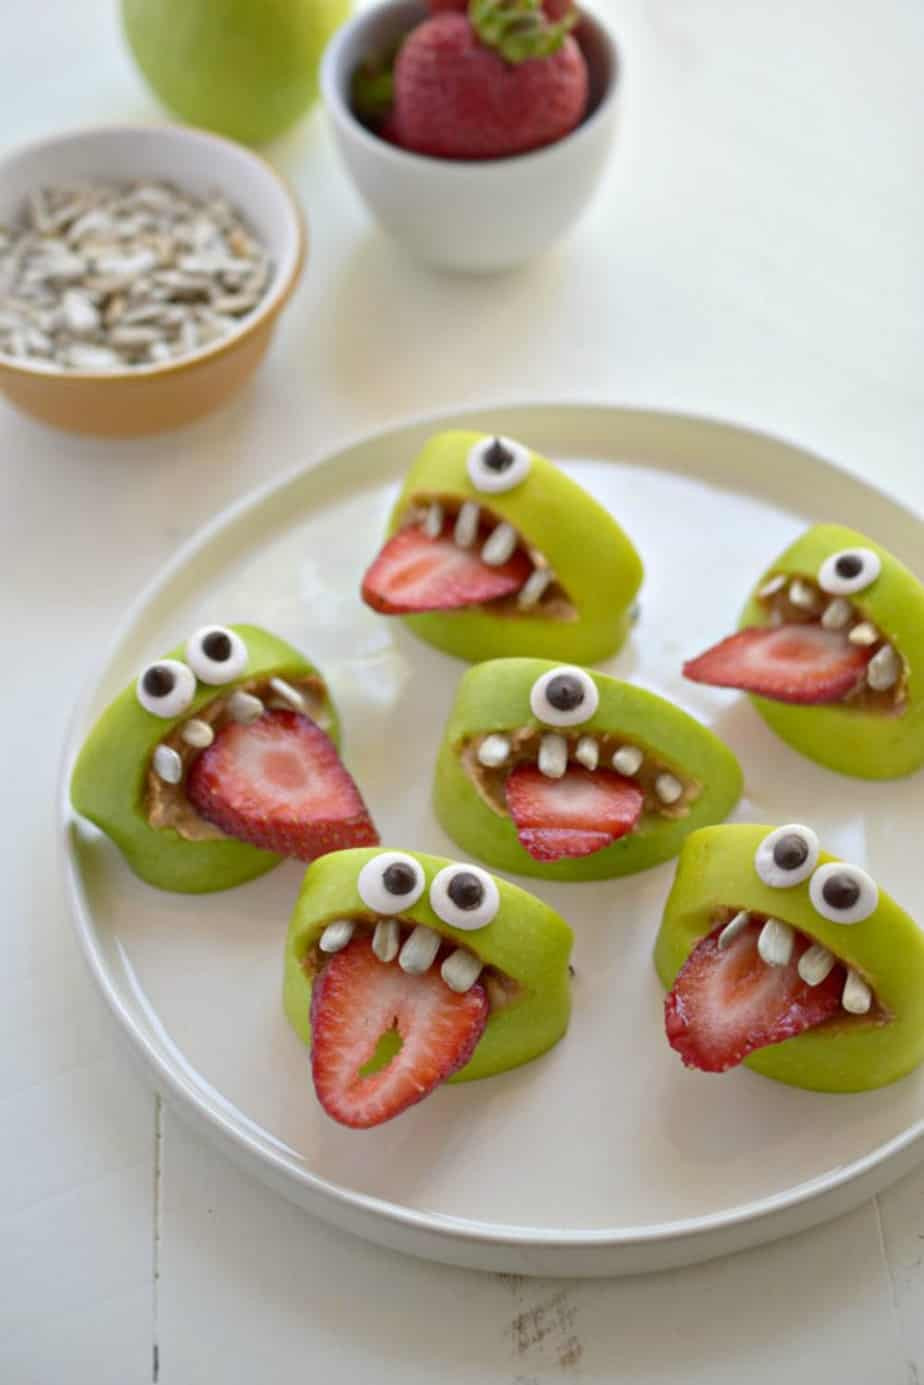 Easy Halloween Party Food Ideas For Adults
 Halloween Food Ideas 2020 With Download Daily SMS